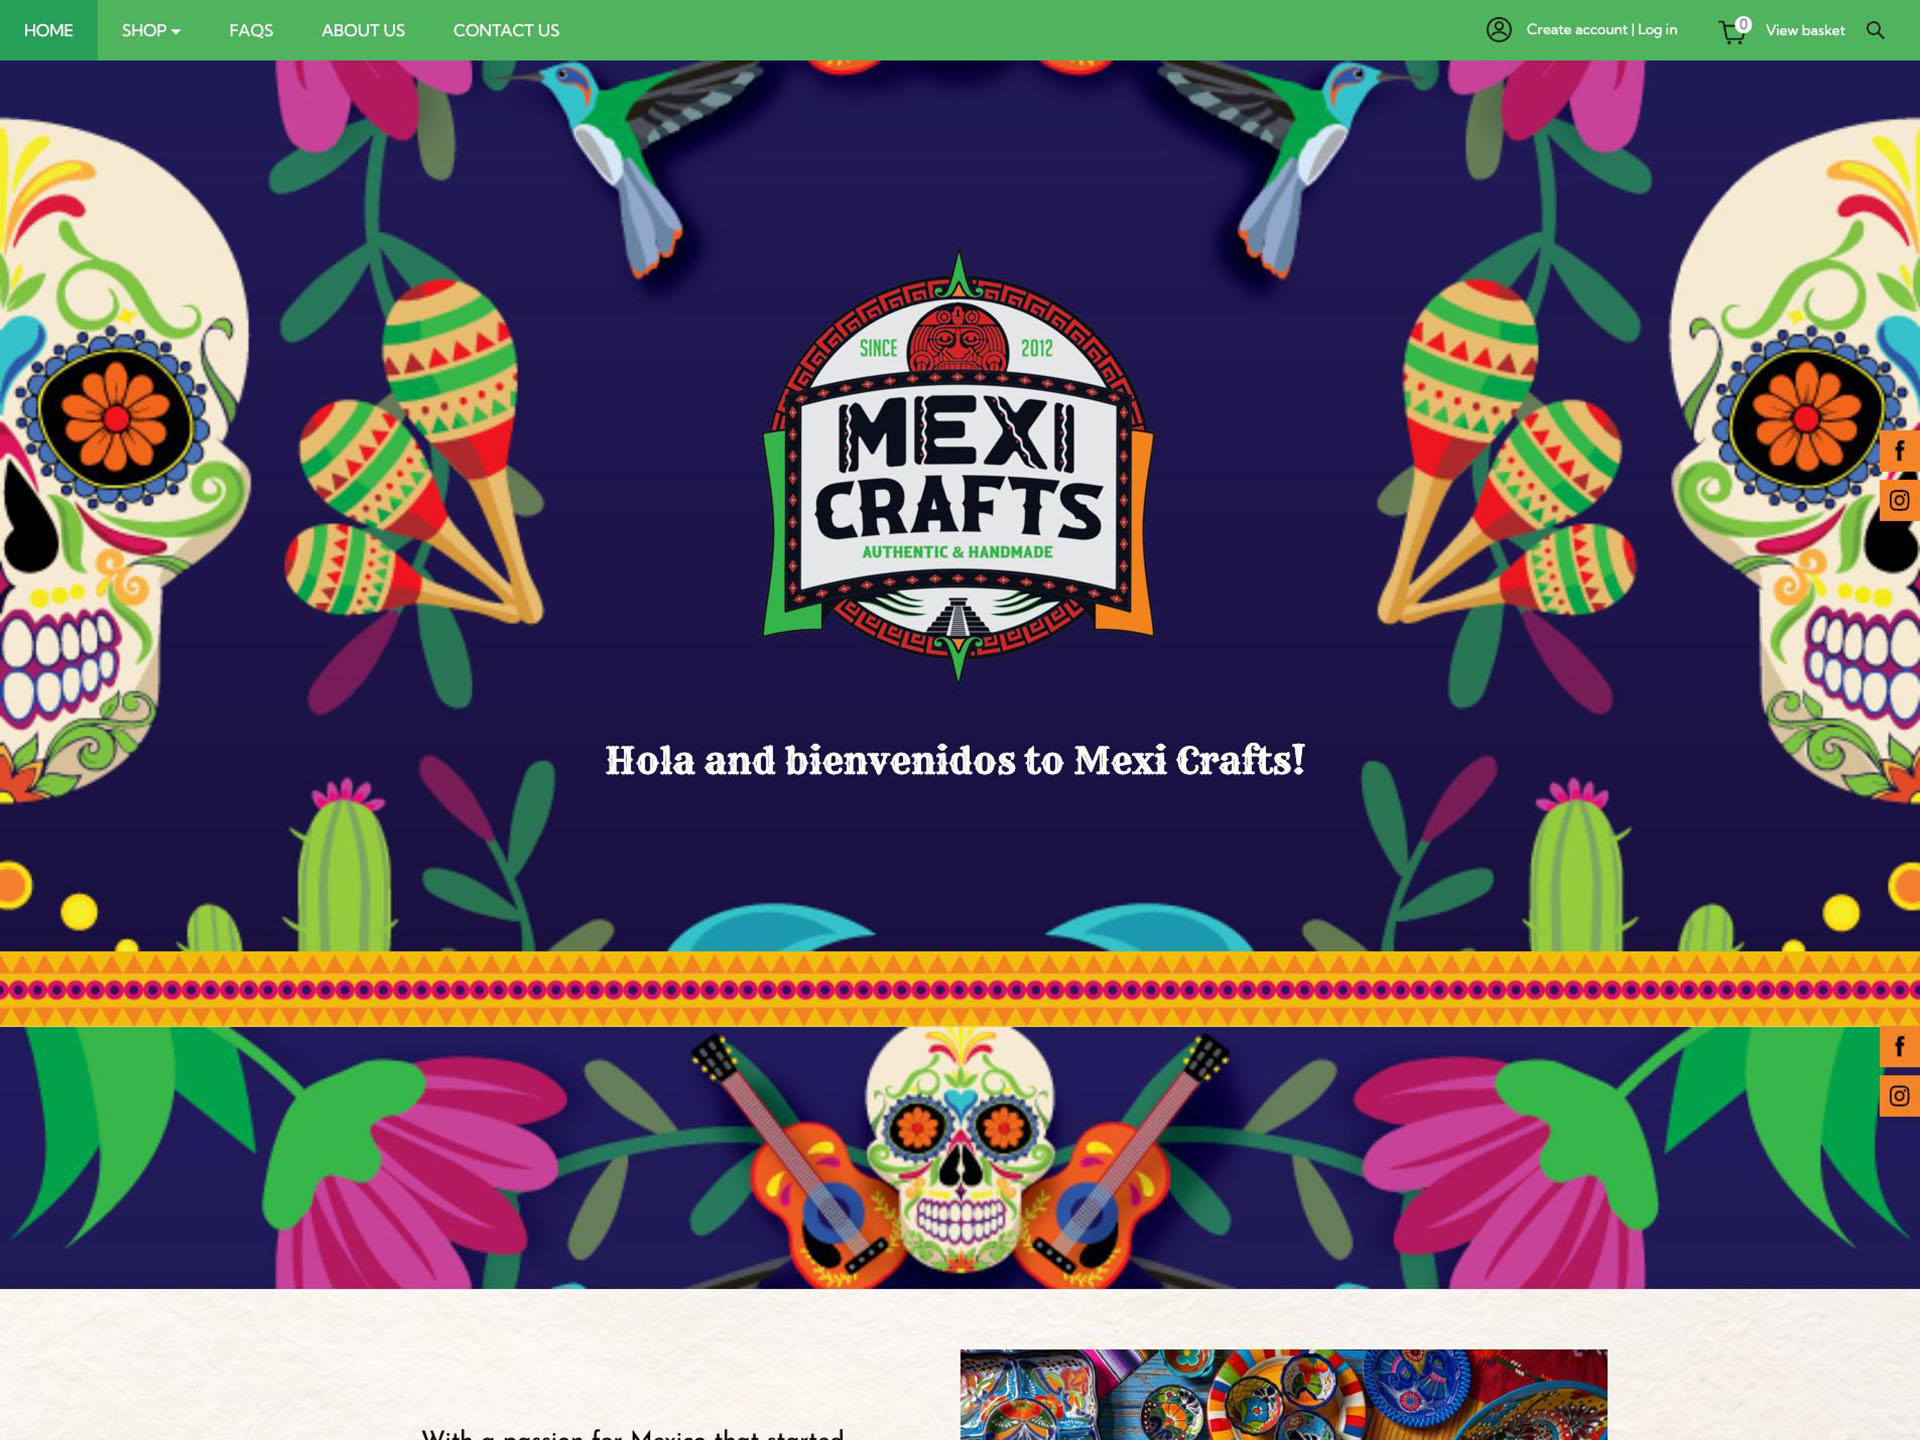 Mexi Crafts website design by it'seeze